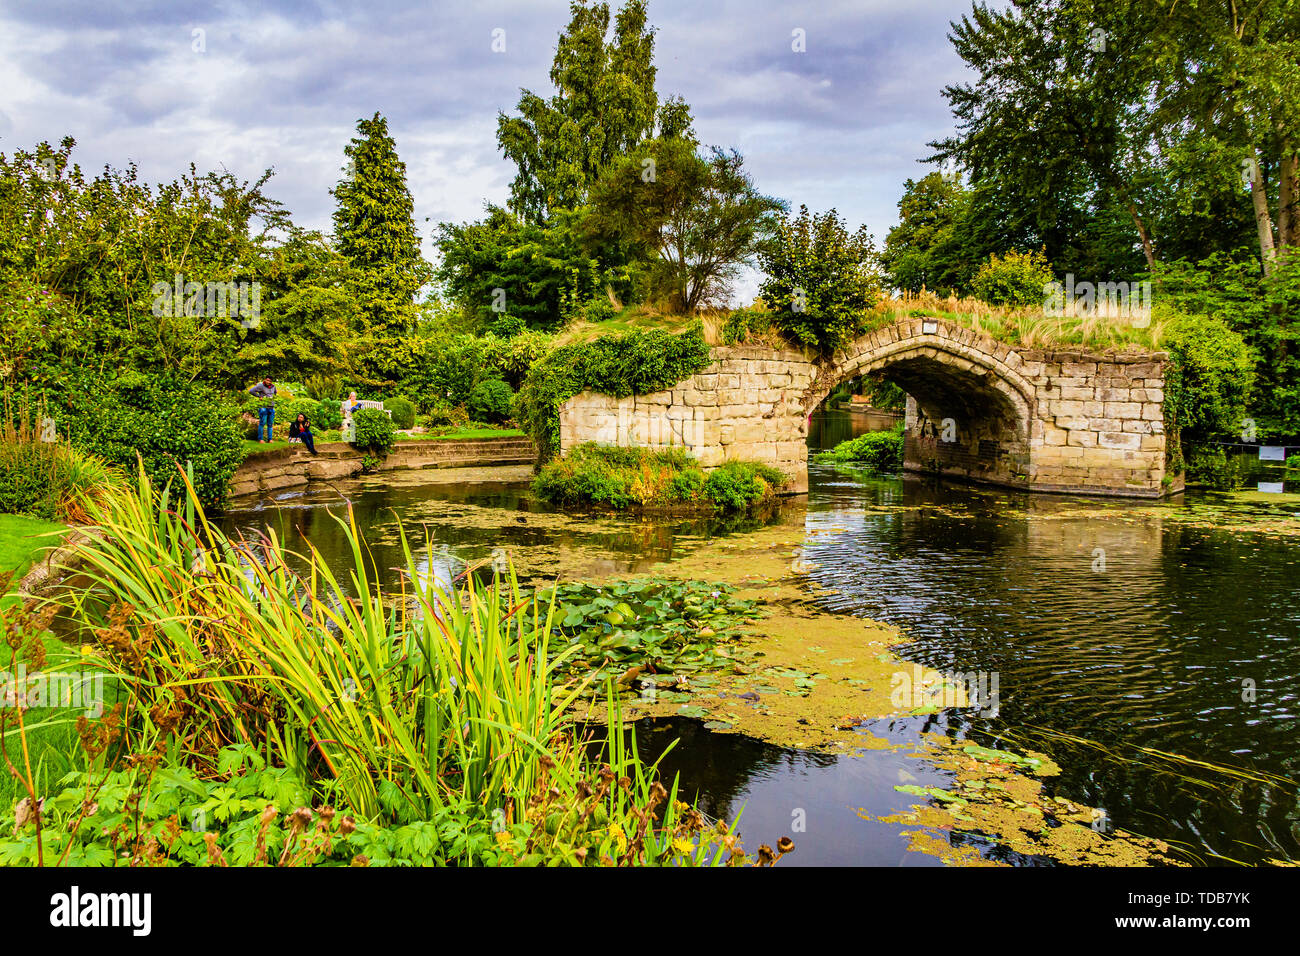 Remains of medieval Old Castle Bridge, that once supported a road over the River Avon & now a romantic ruin. View from the Mill Garden, Warwick, UK. Stock Photo